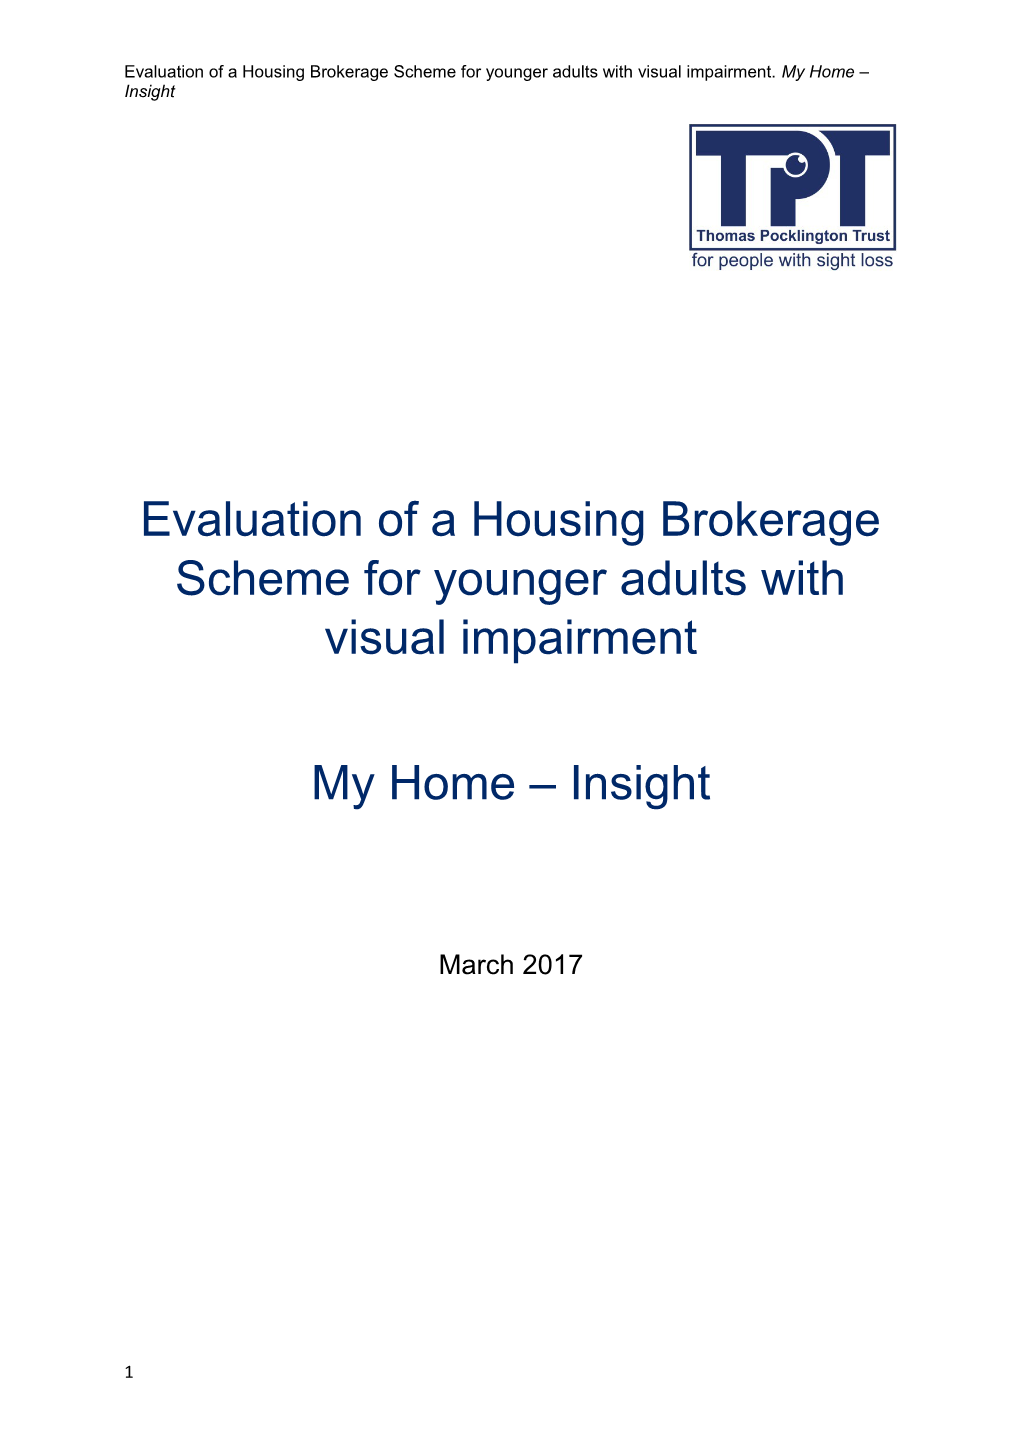 Evaluation of a Housing Brokerage Scheme for Younger Adults with Visual Impairment